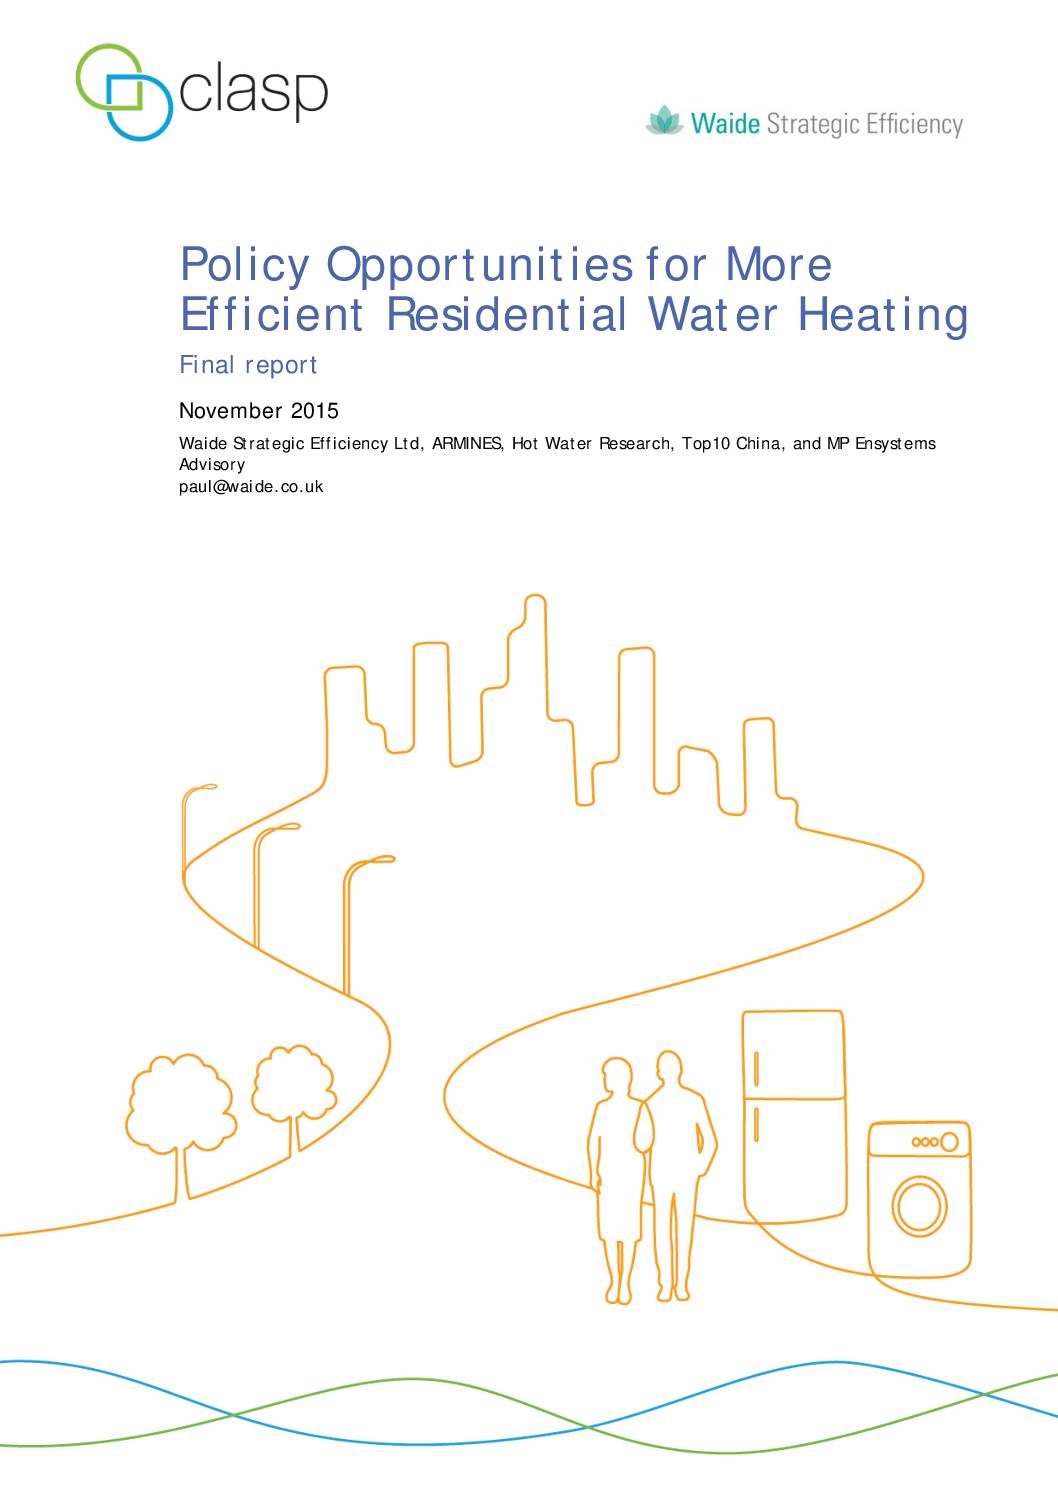 Policy Opportunities for More Efficient Residential Water Heating